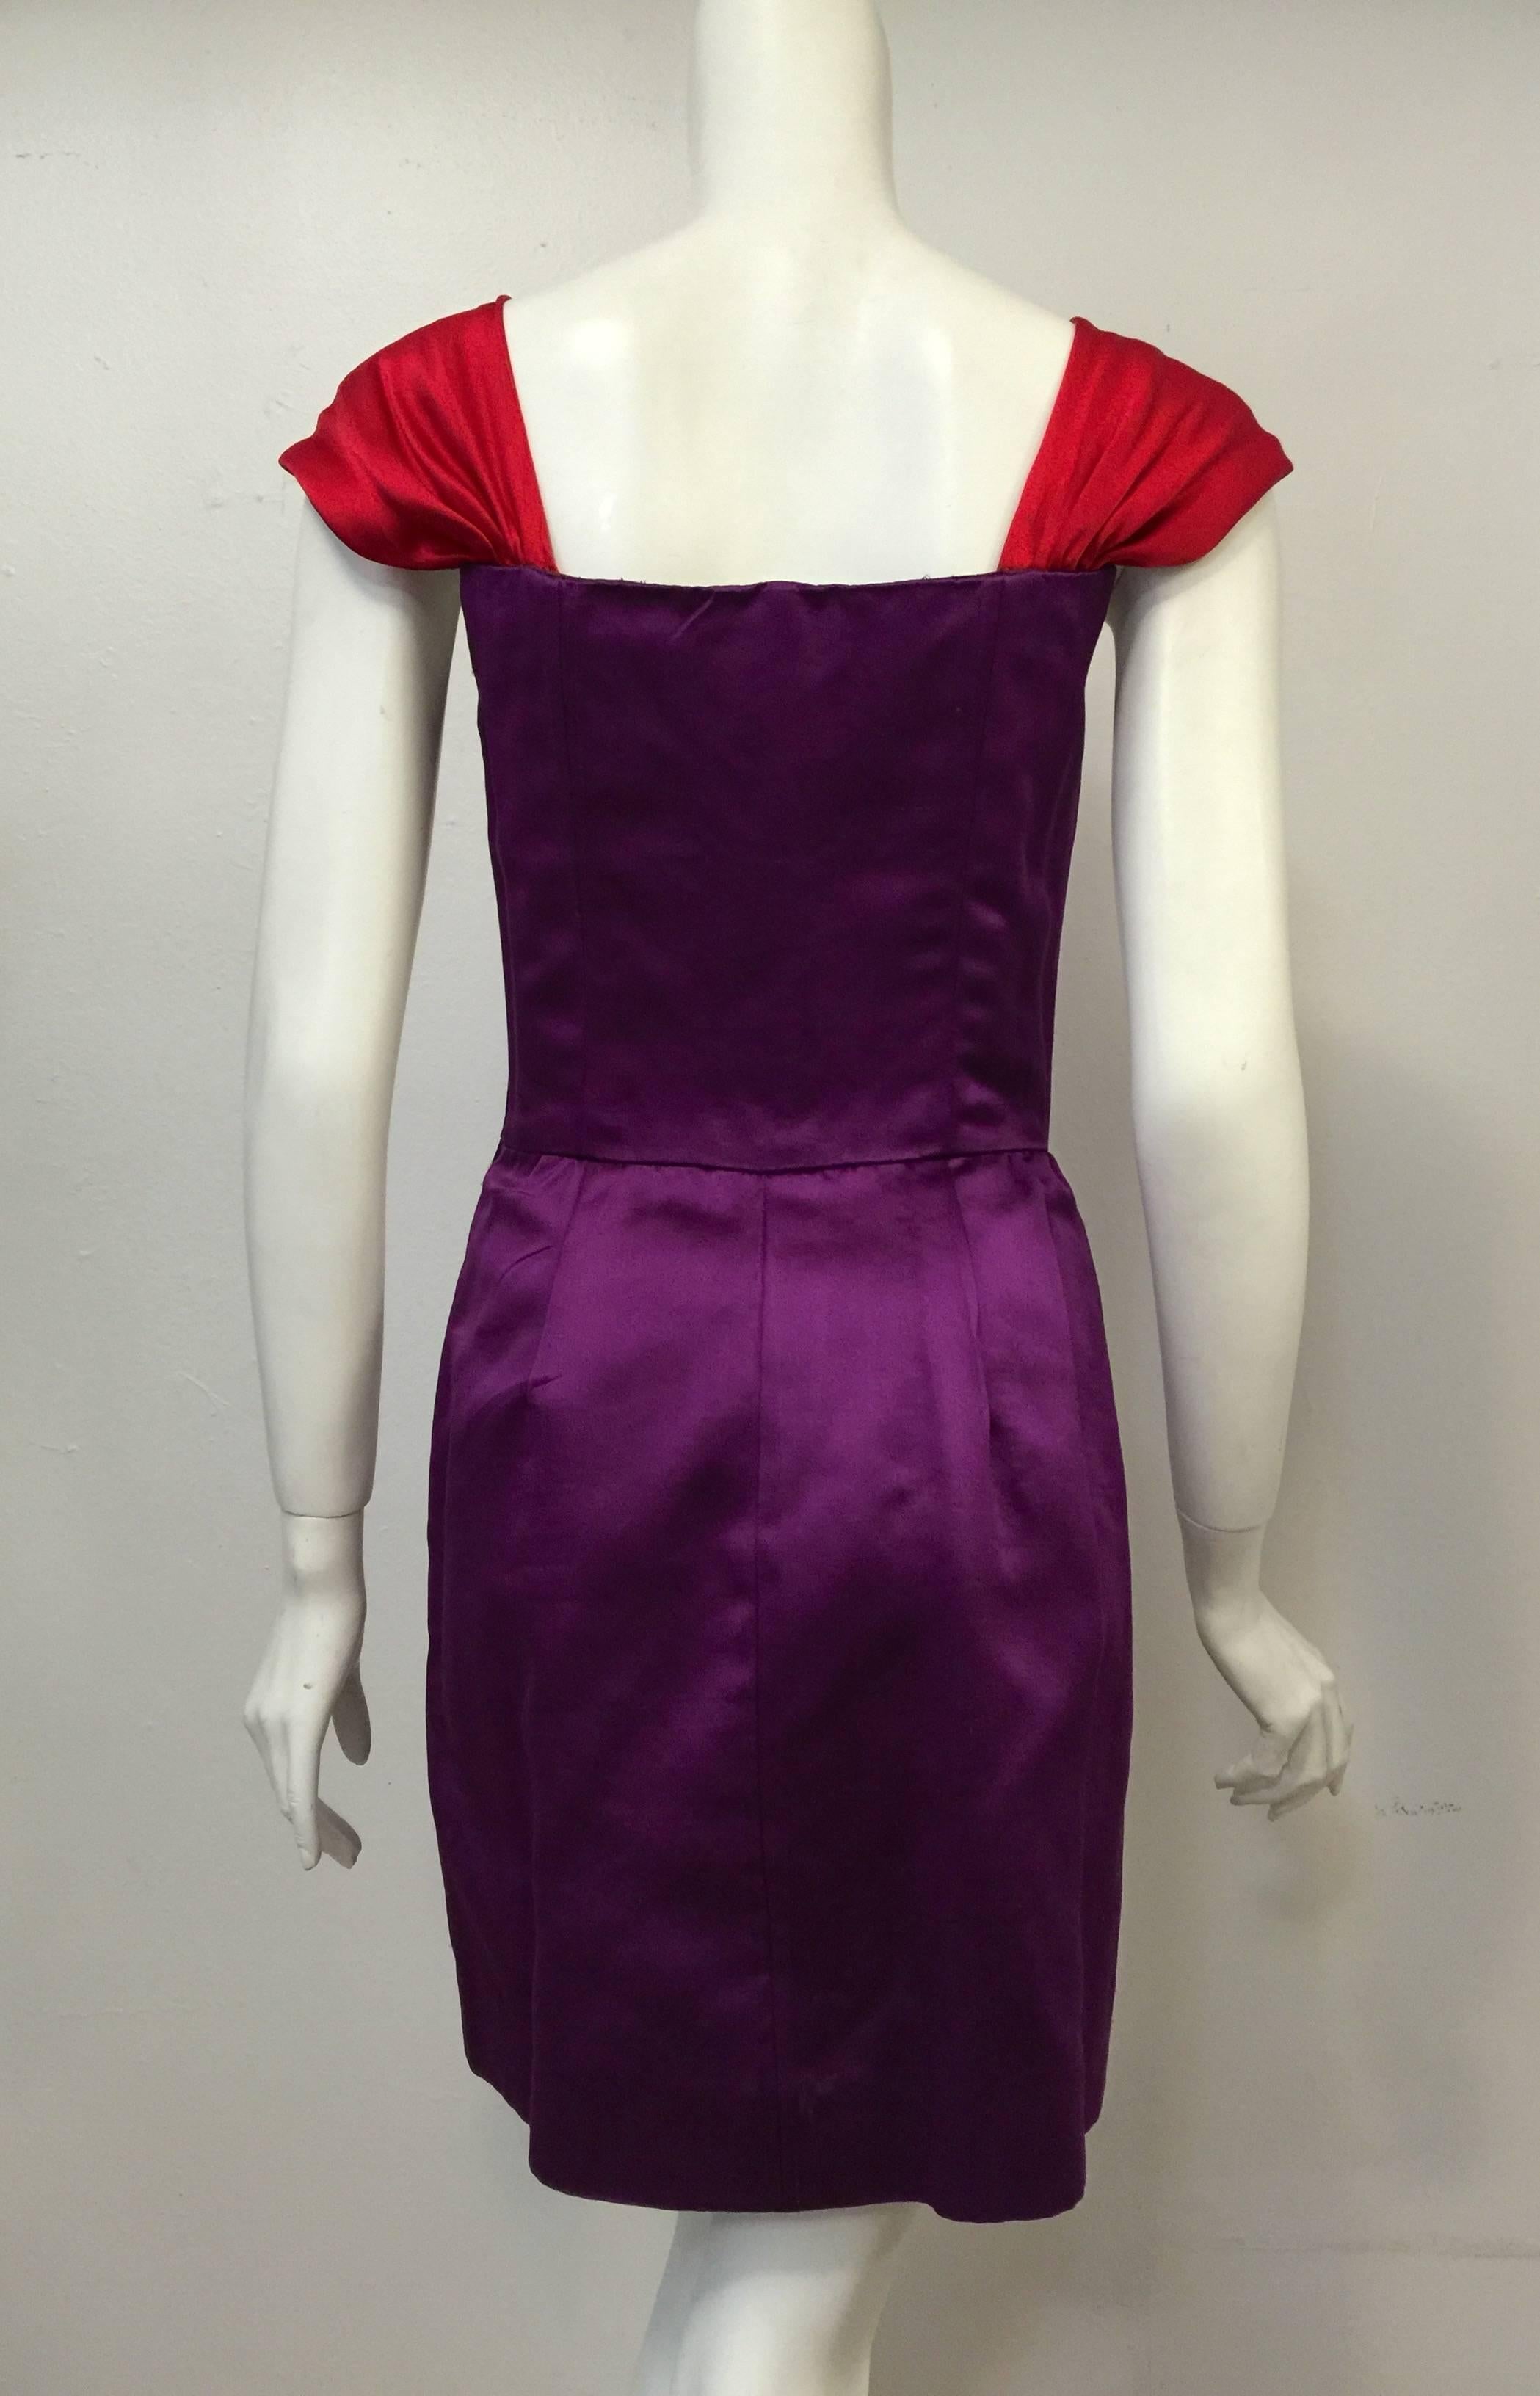 Black 1990s Lanvin Electric Aubergine and Berry Silk Satin Cap Sleeve Cocktail Dress  For Sale